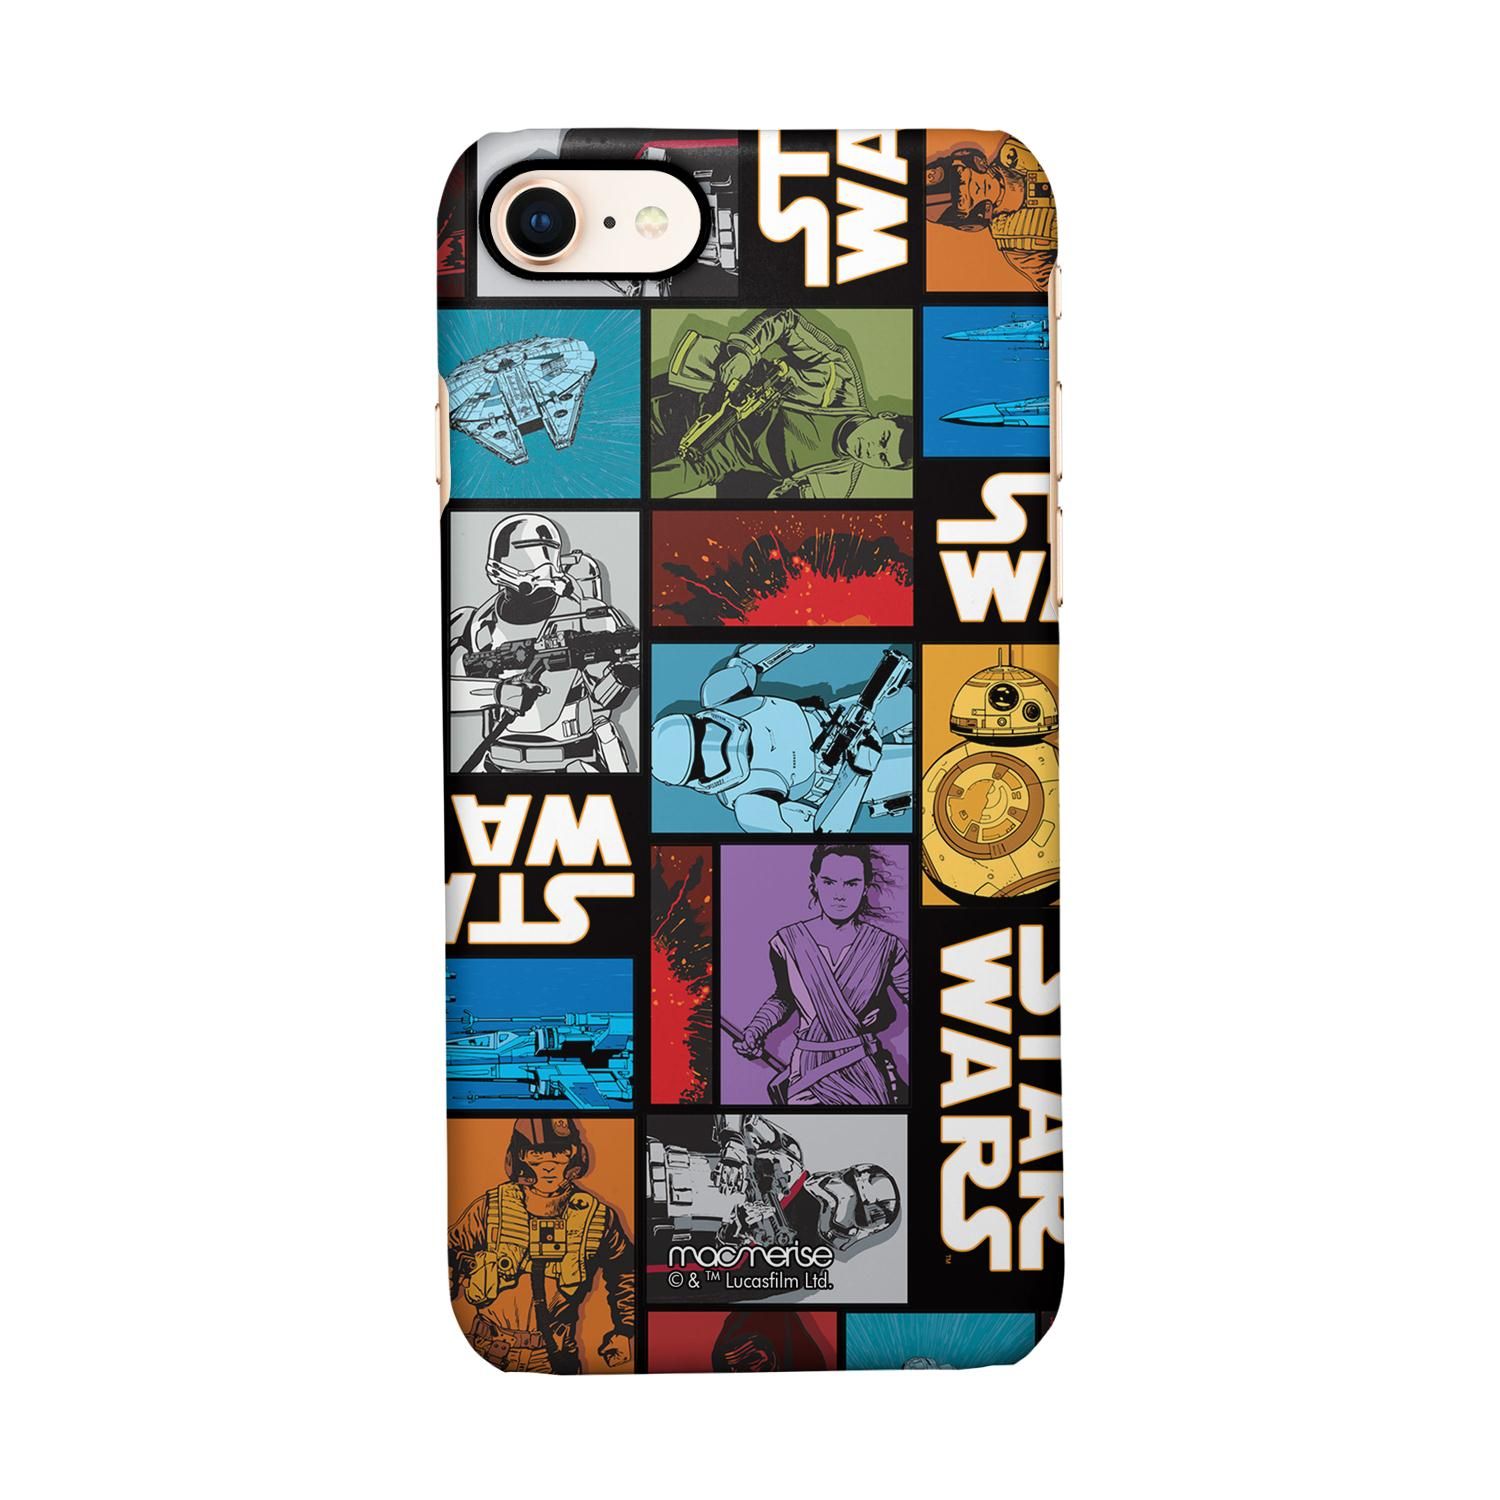 Buy The Force Awakens - Sleek Phone Case for iPhone 7 Online